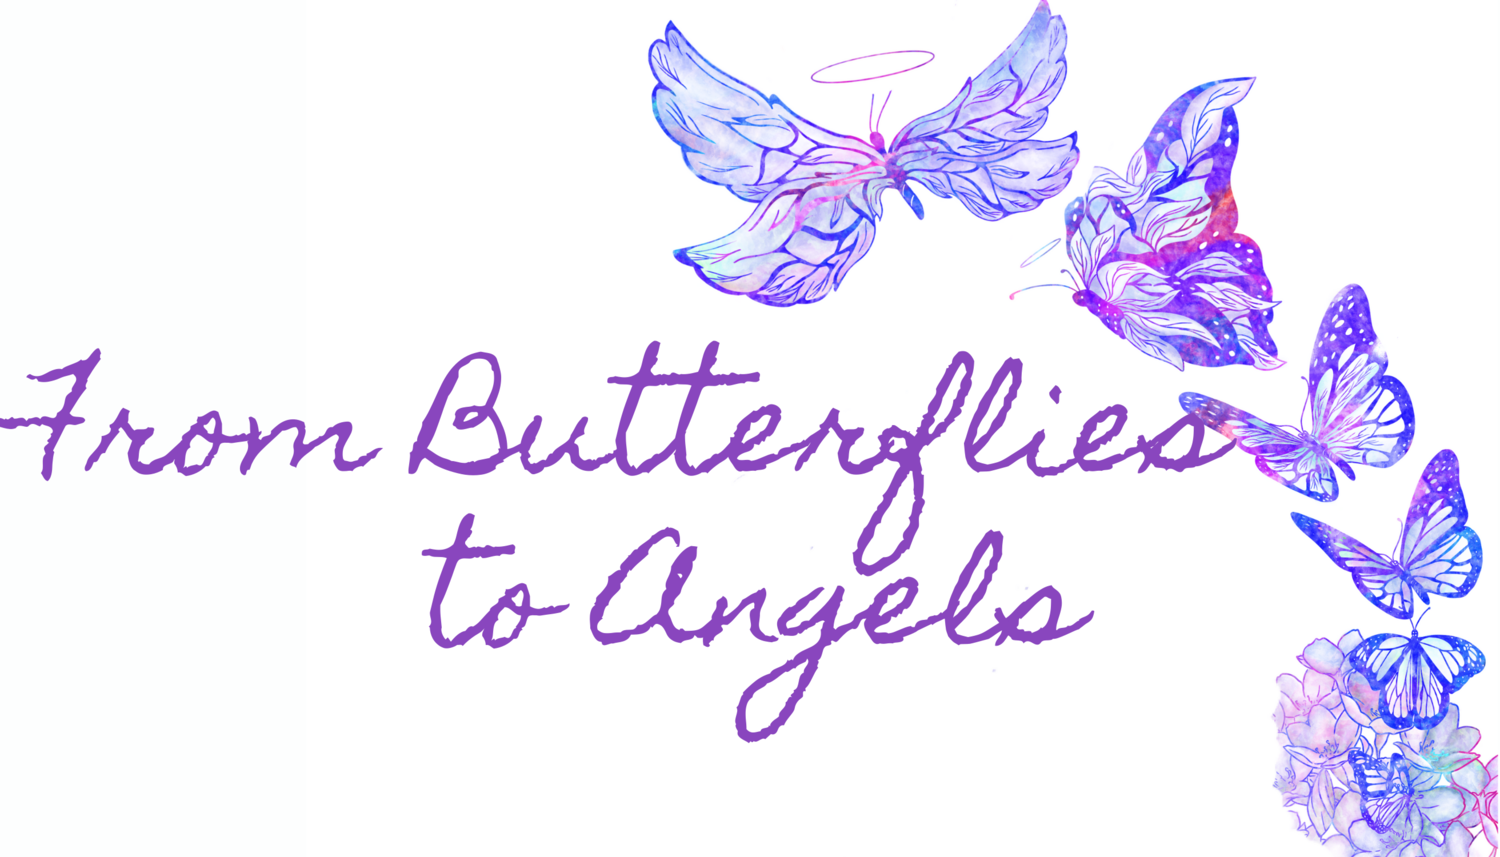 From Butterflies to Angels